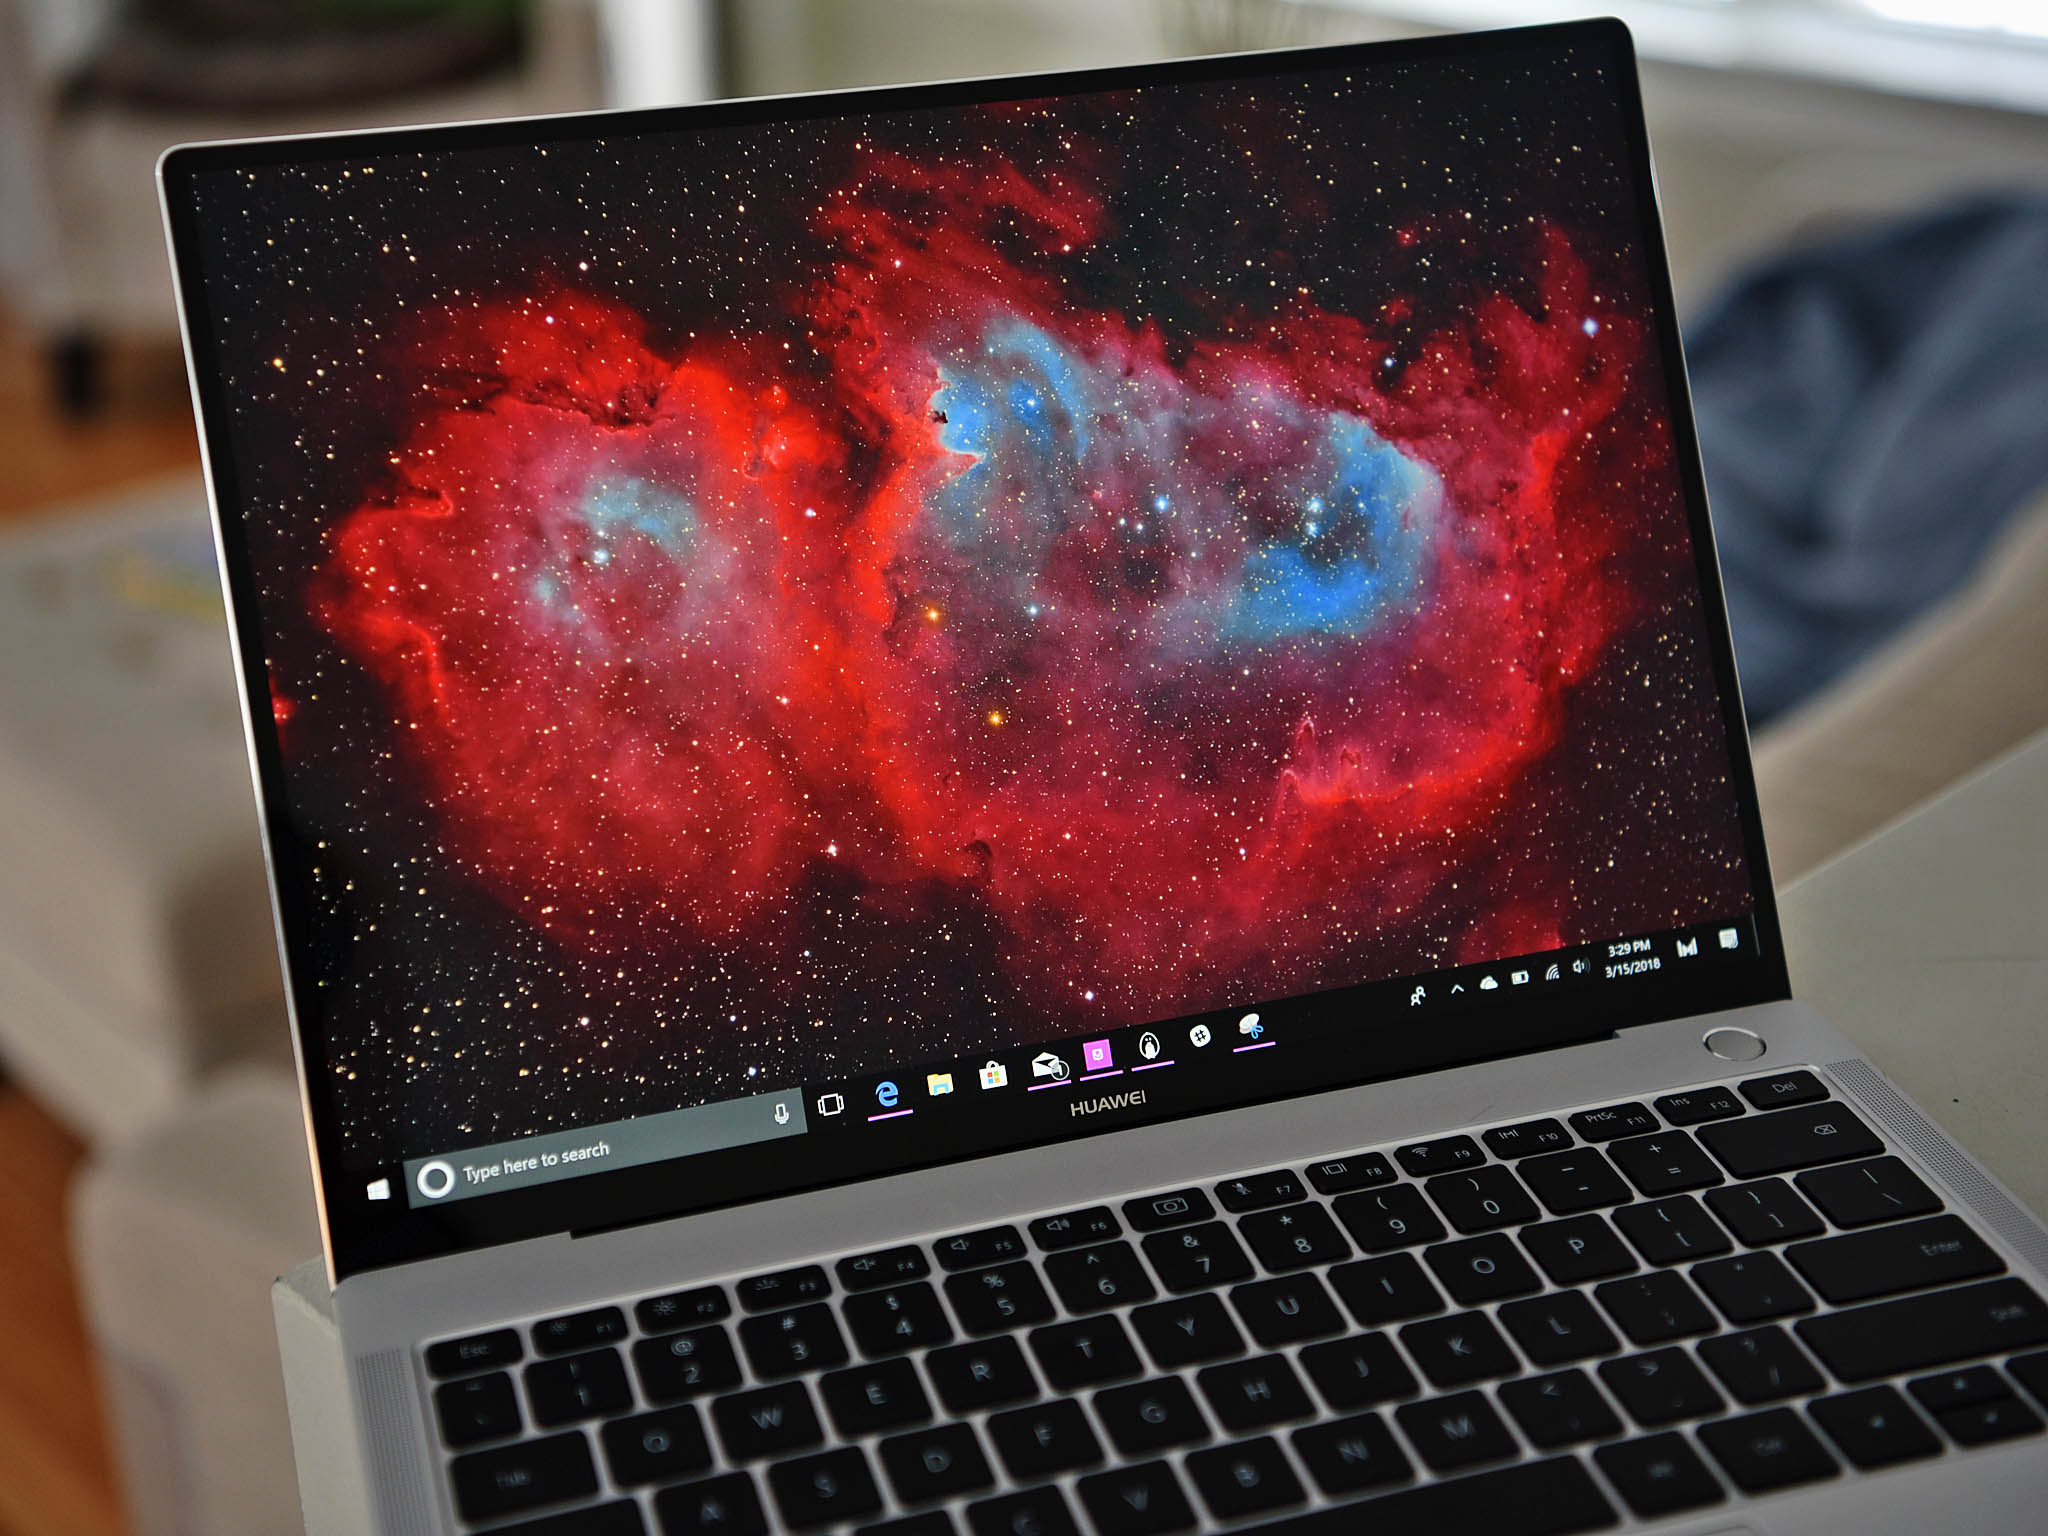 Go Deep In Space With The Microsoft Nebulas In 4k Wallpaper Theme Windows Central